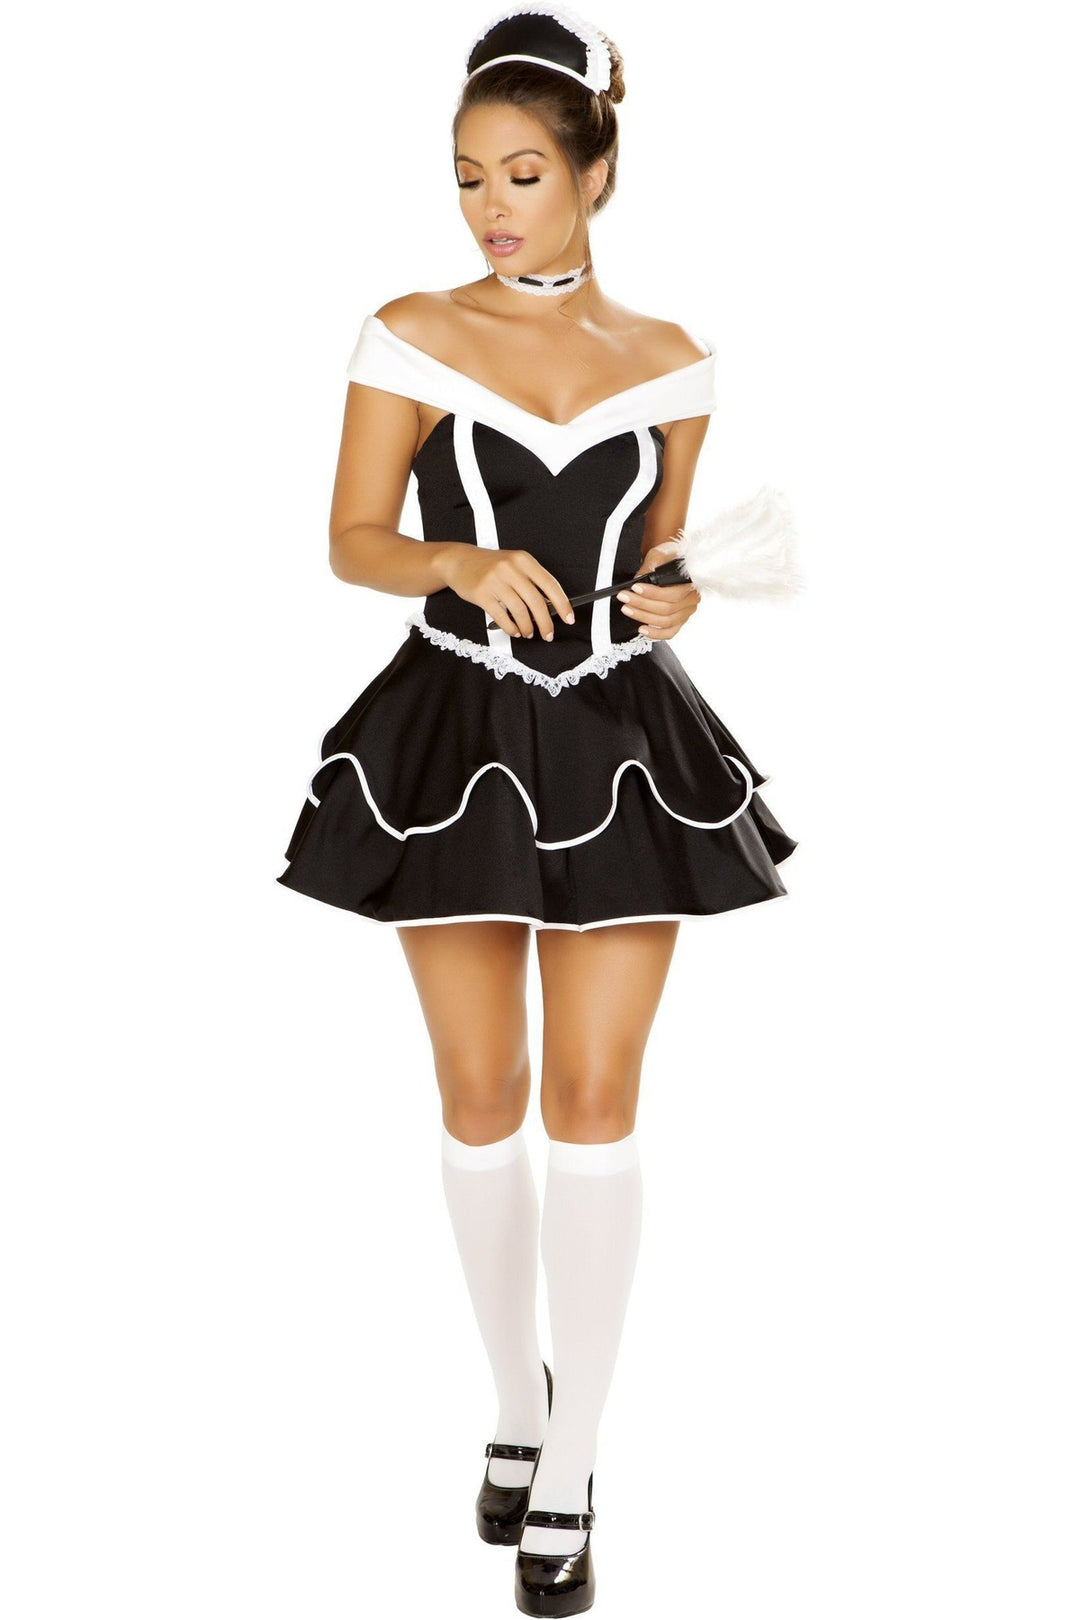 Roma Sexy Chamber Maid Costume-SEXYSHOES.COM